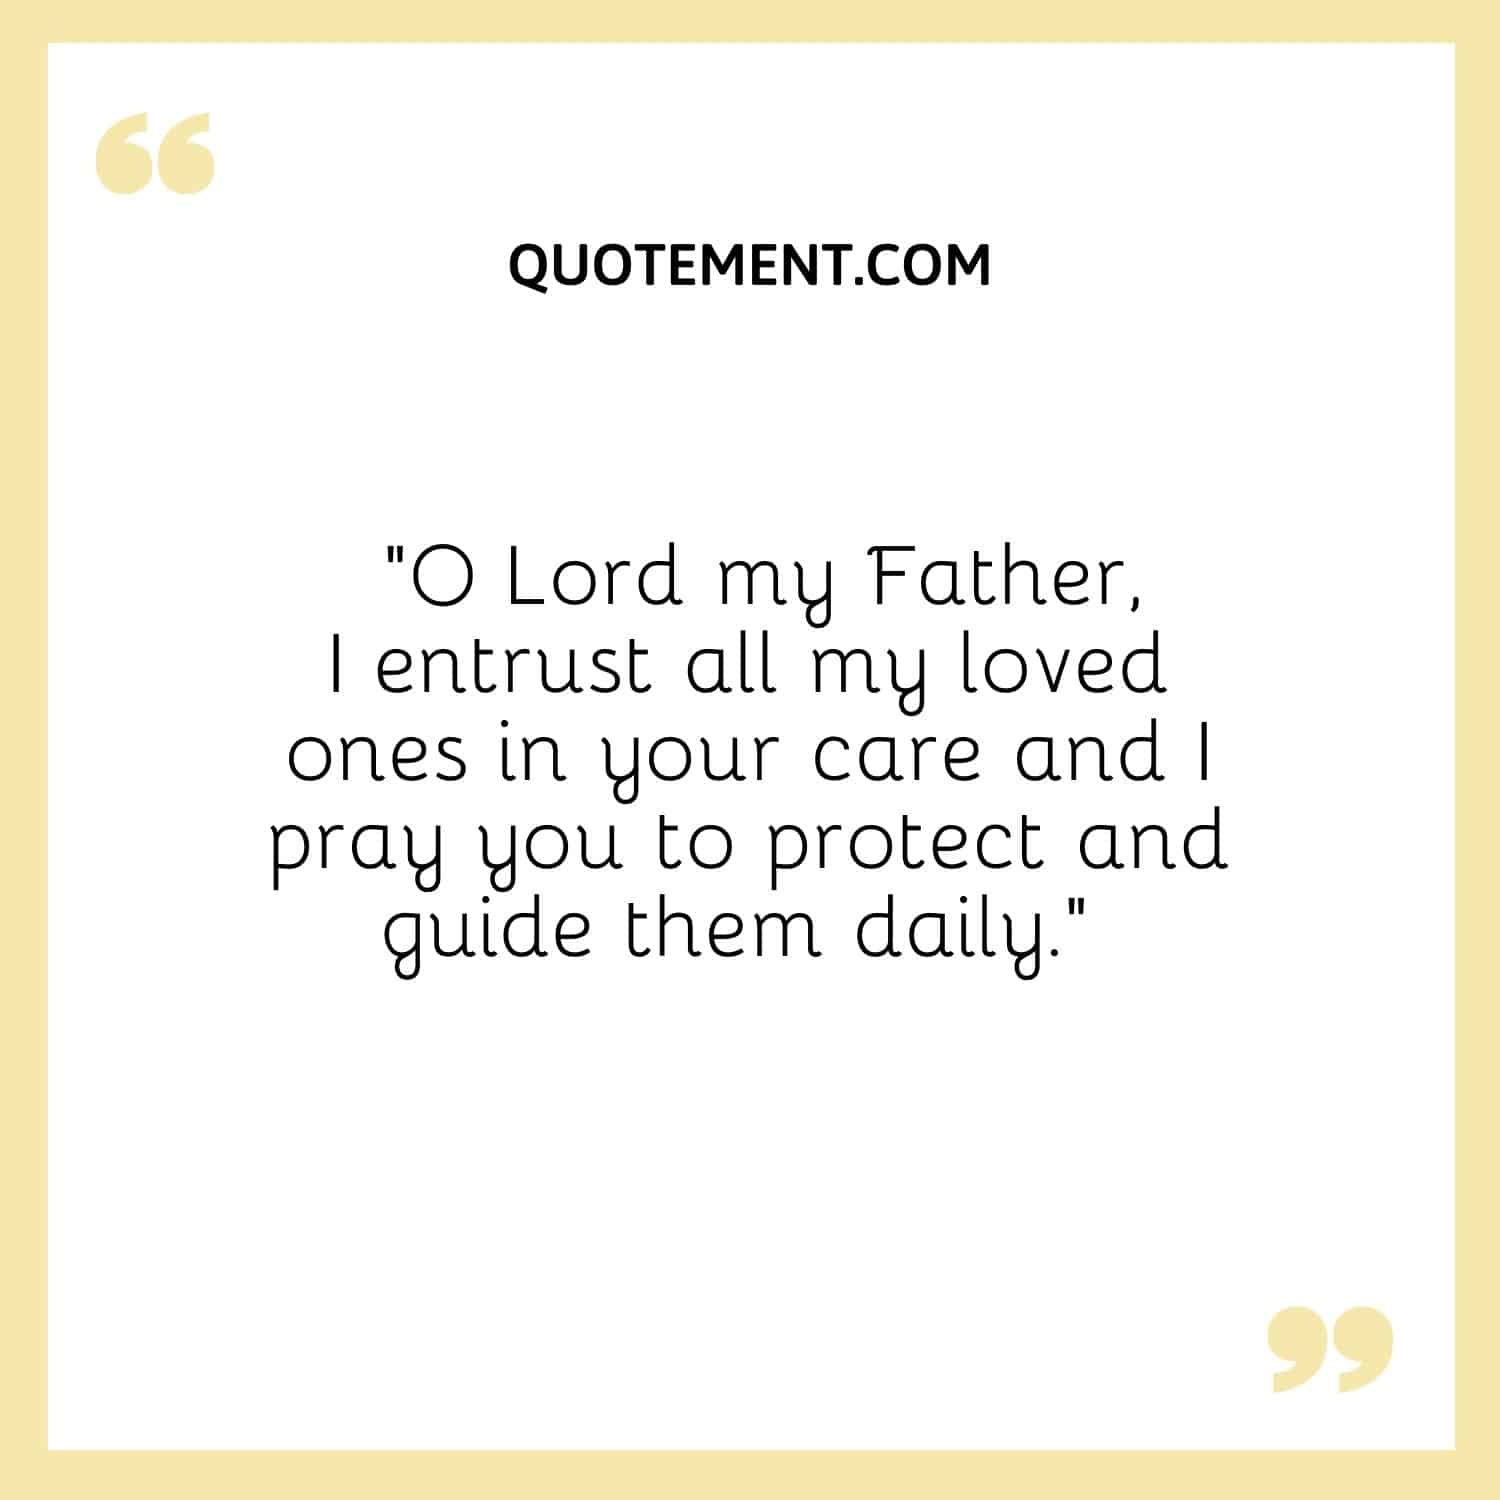 O Lord my Father, I entrust all my loved ones in your care